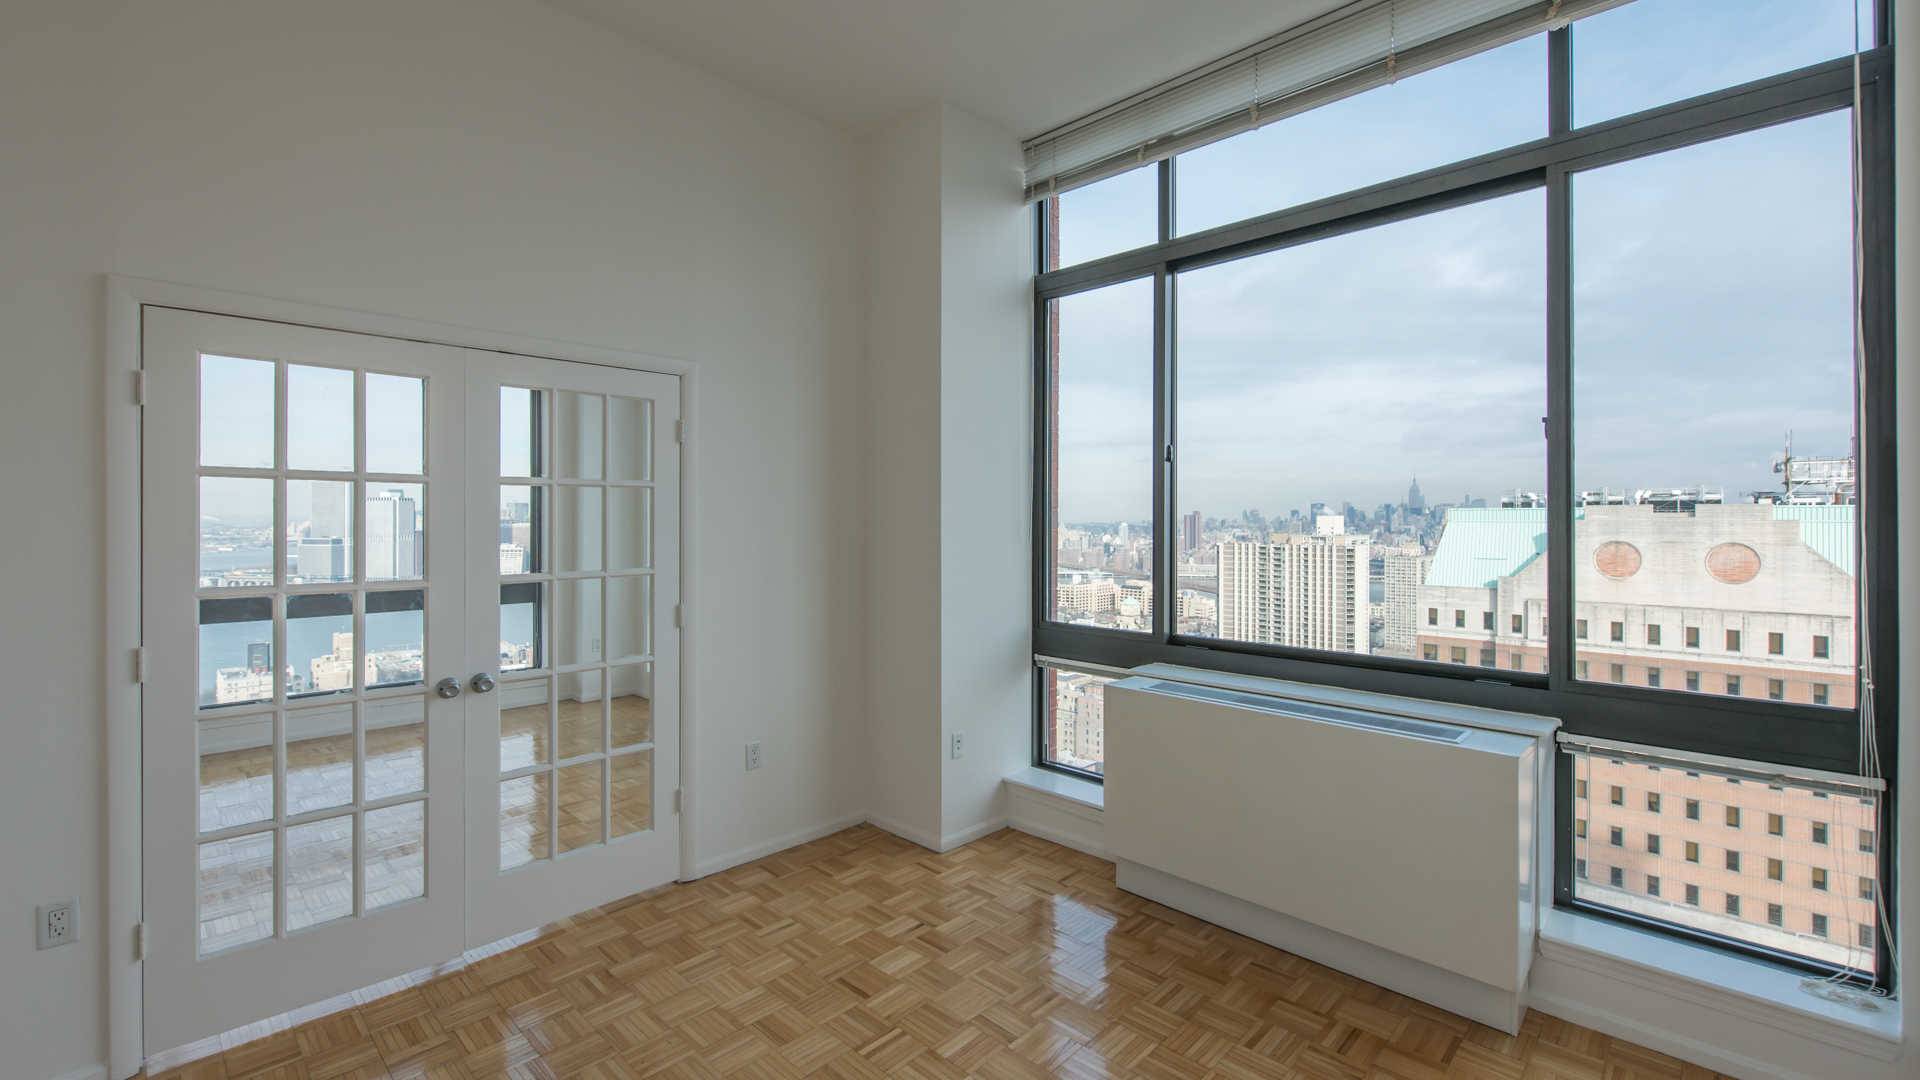 Beautiful Brooklyn Heights 3 Bedroom Apartment with 2.5 Baths featuring a Fitness Center and Rooftop Deck